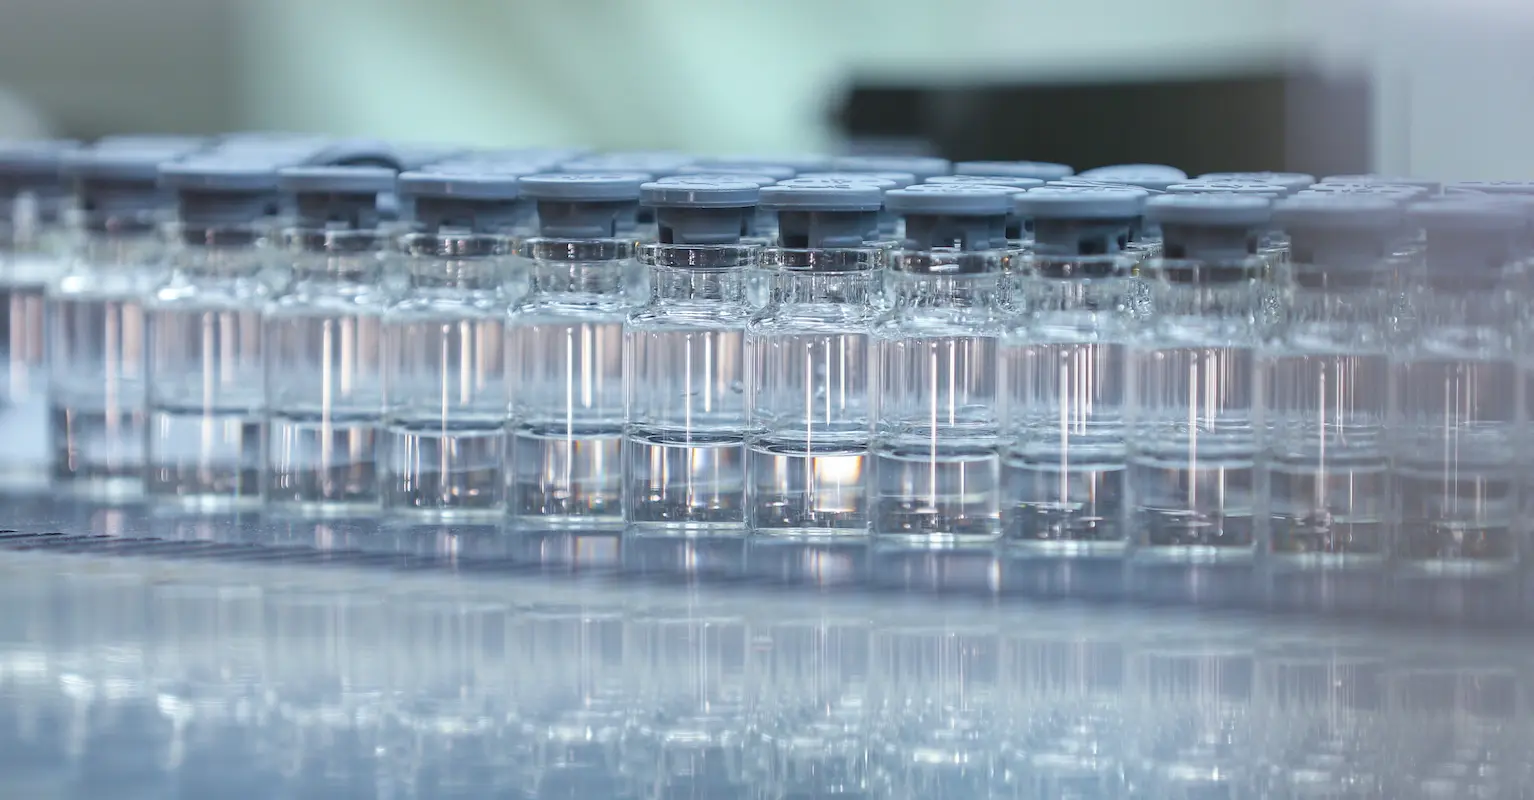 Rows of glass vials with gray caps, filled with a clear liquid, are aligned on a reflective surface in a laboratory setting.